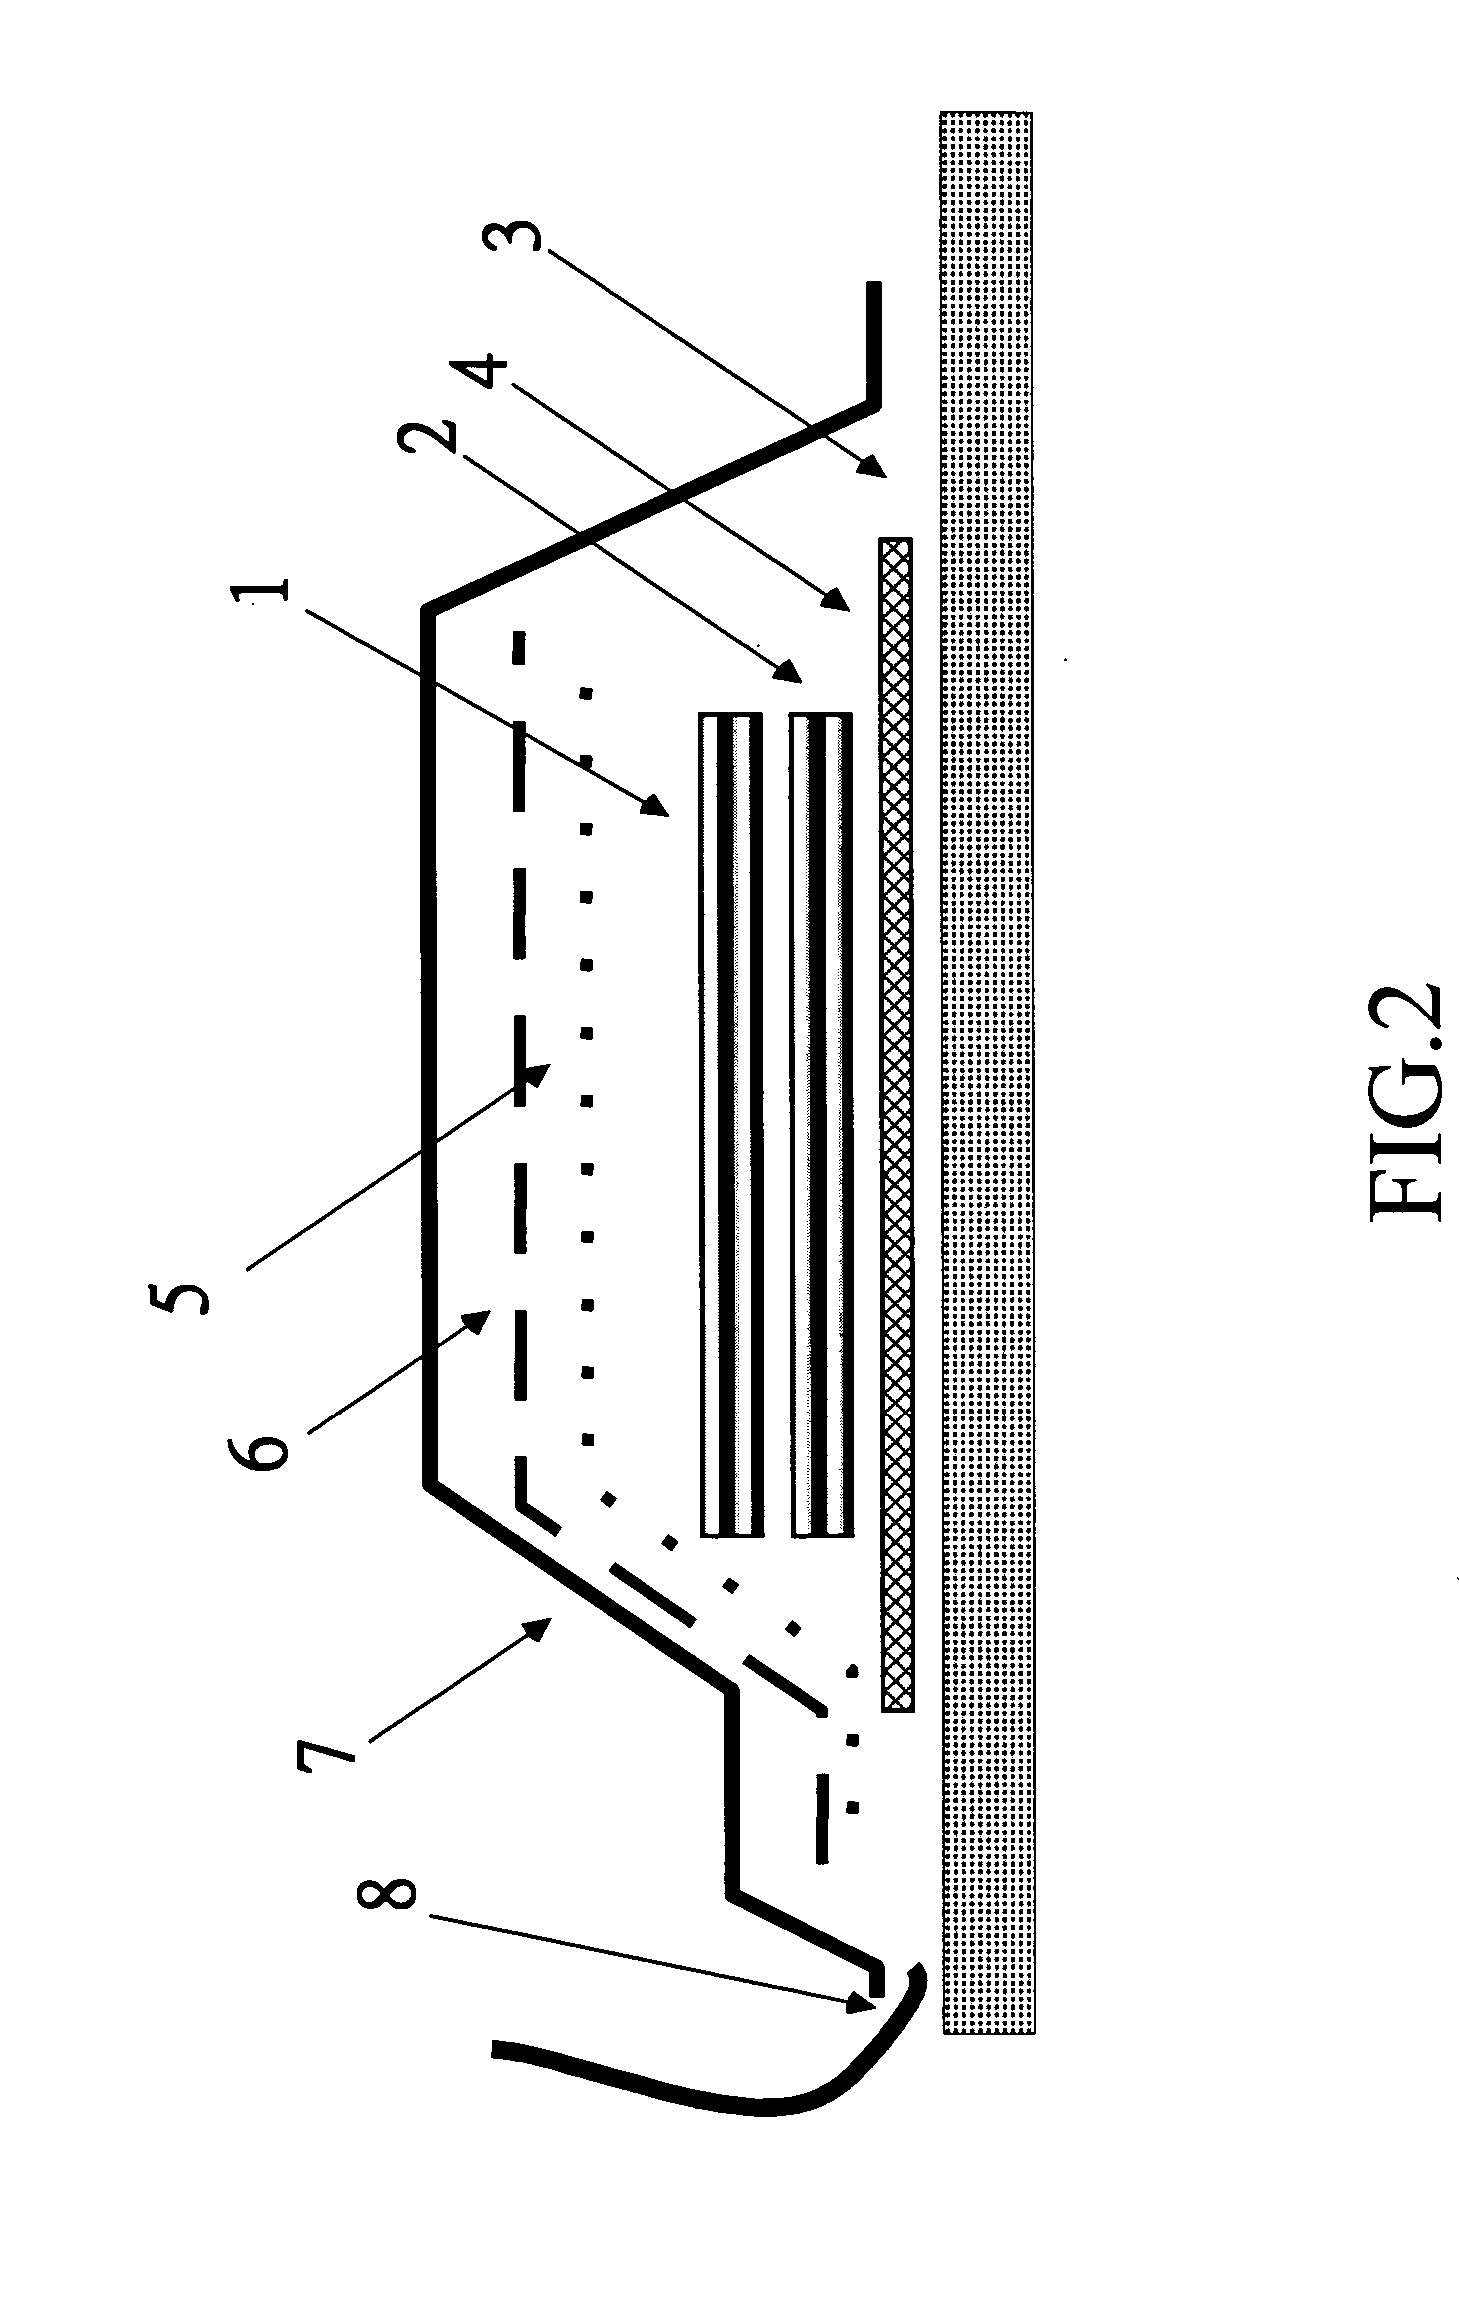 Process of maniudacturing dual-layered thermal insulation composite panel